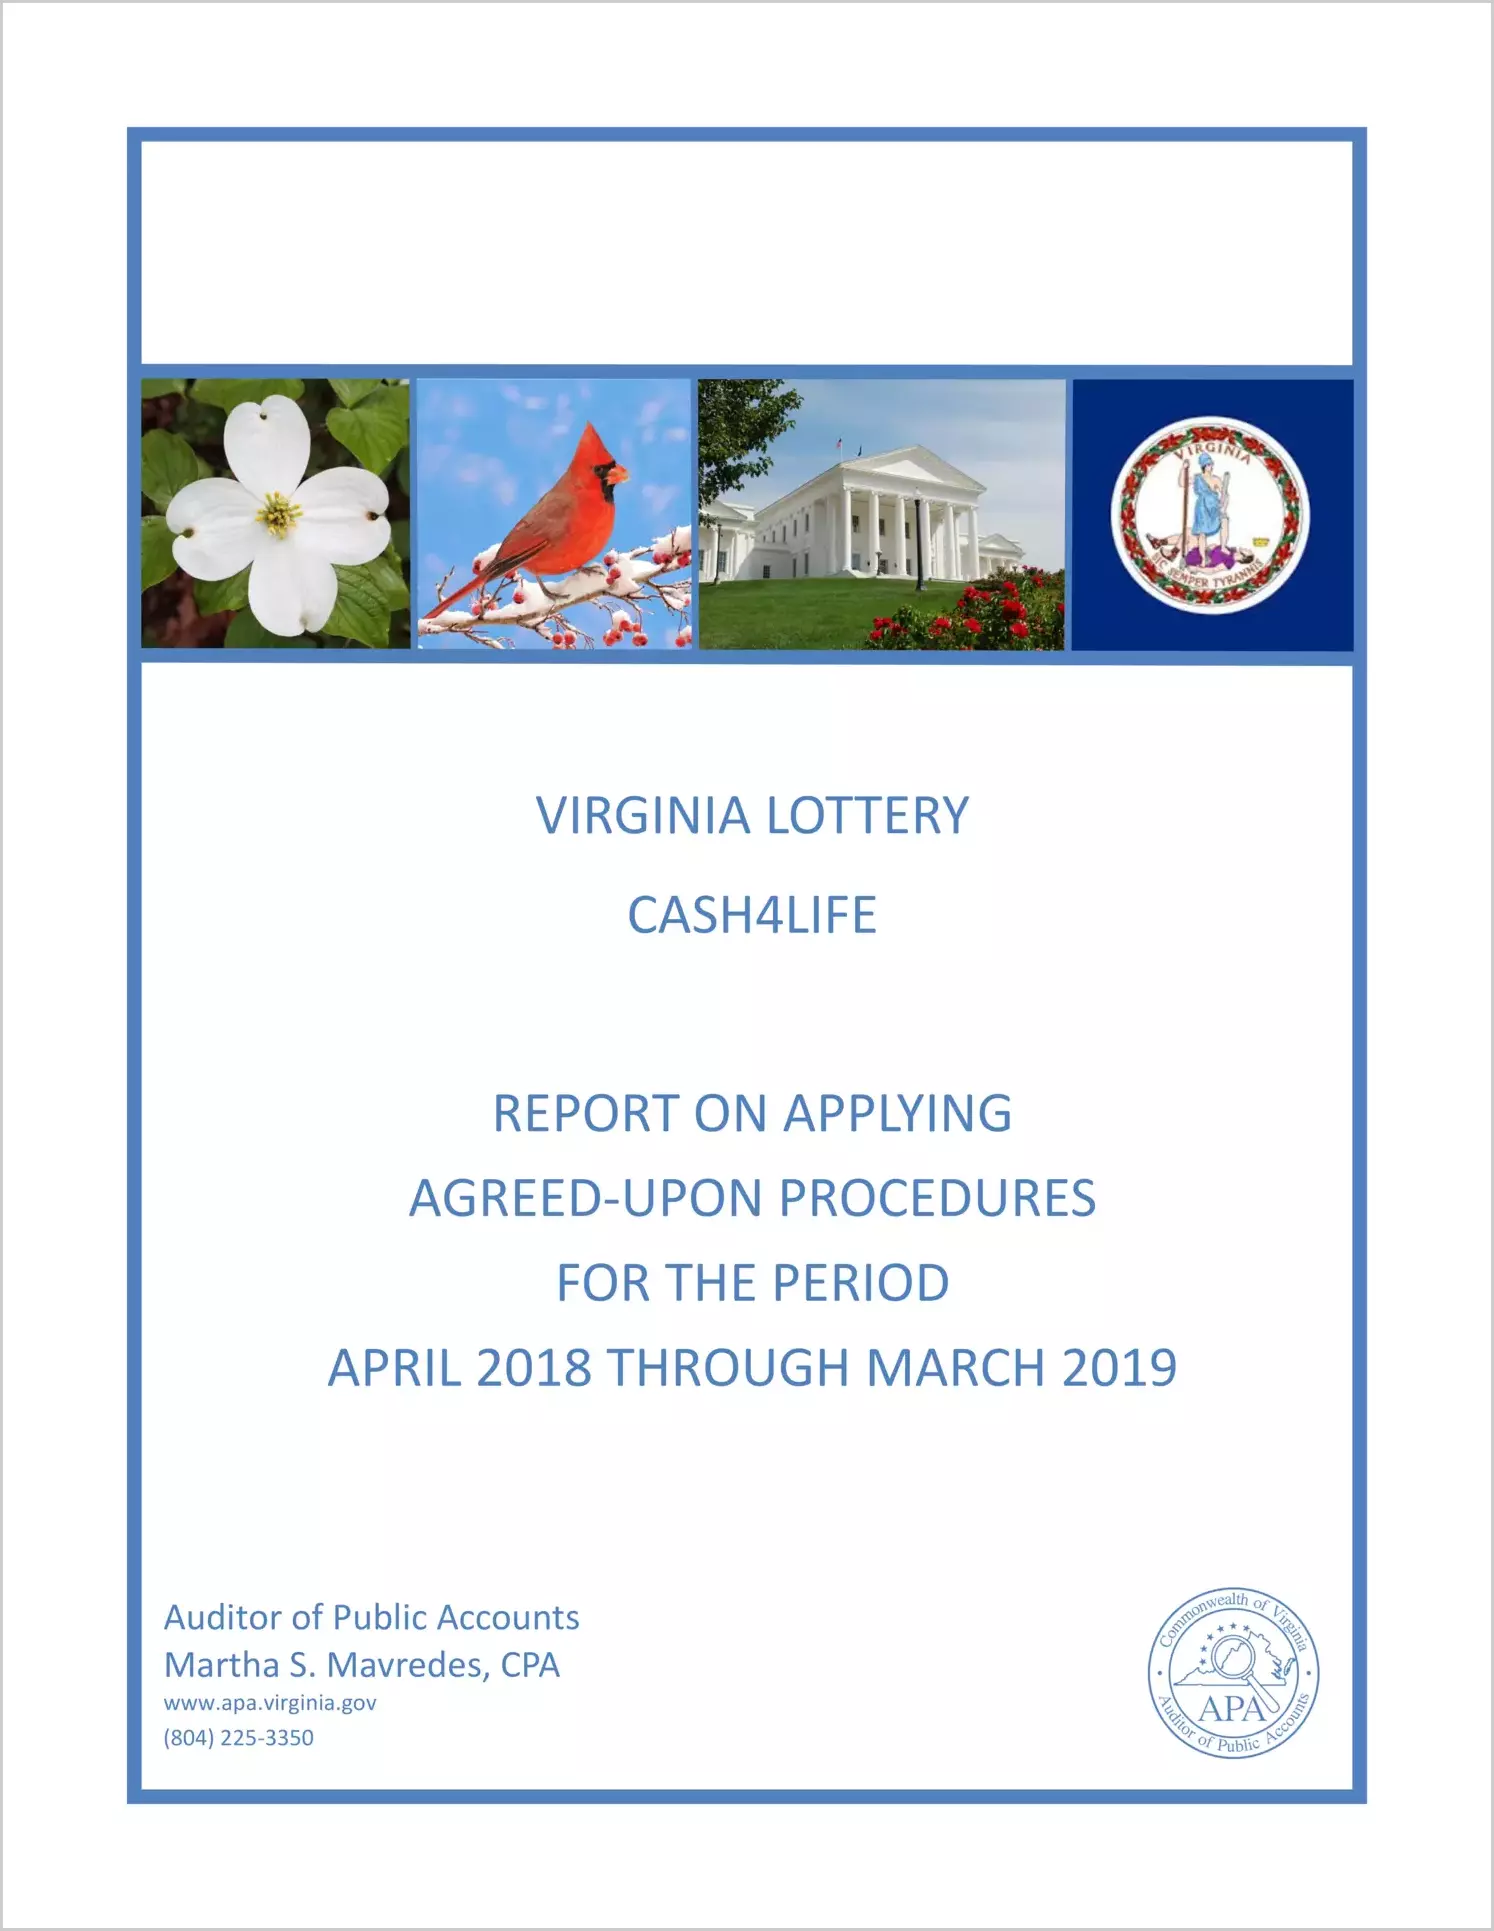 VA Lottery Cash4Life report on Applying Agreed-Upon Procedures for the period April 2018 through March 2019